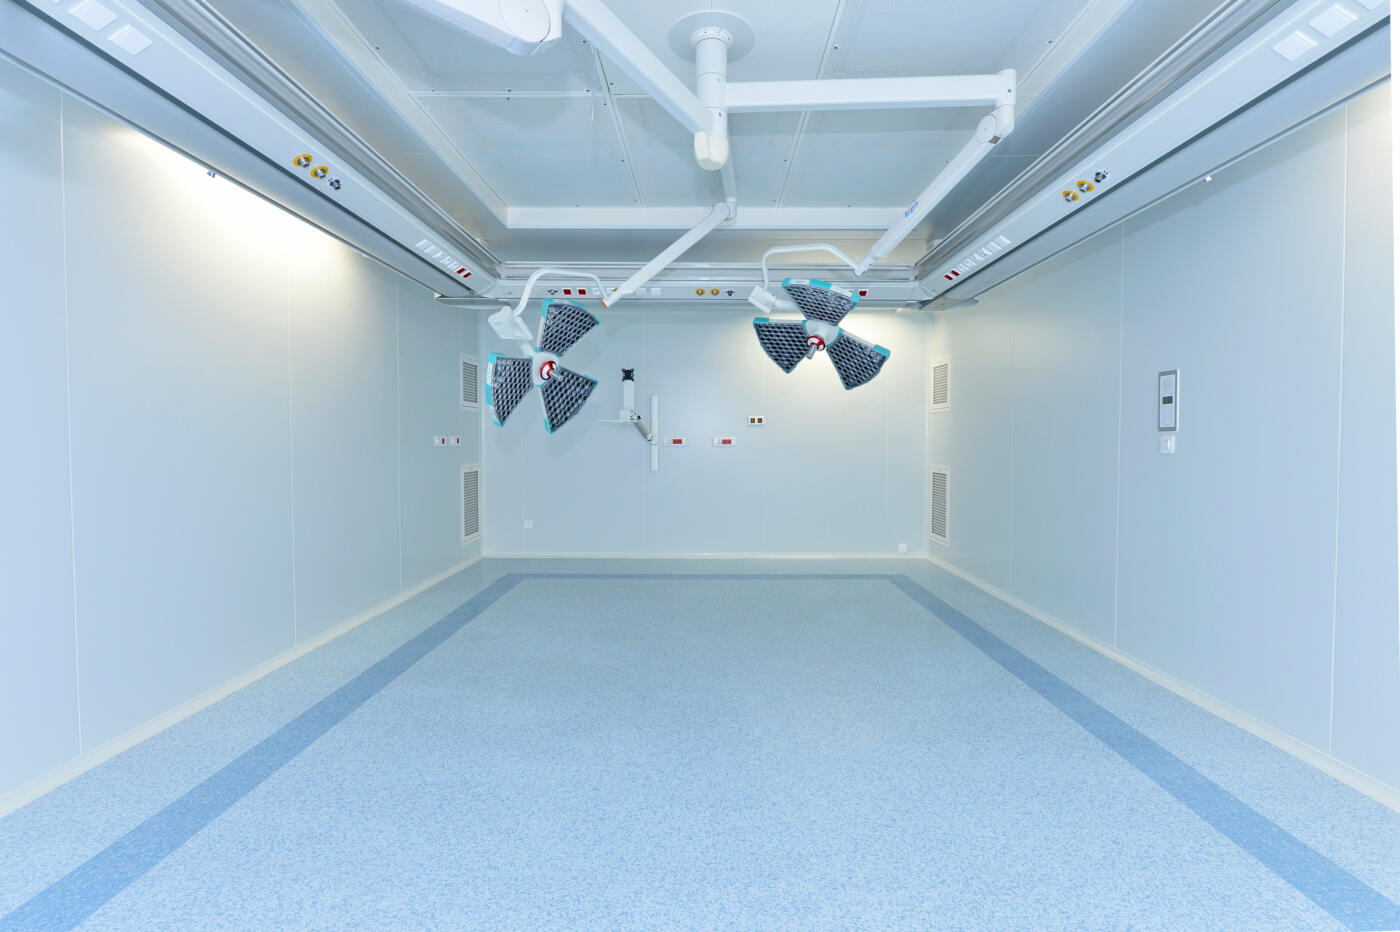 View of a room in the health sector